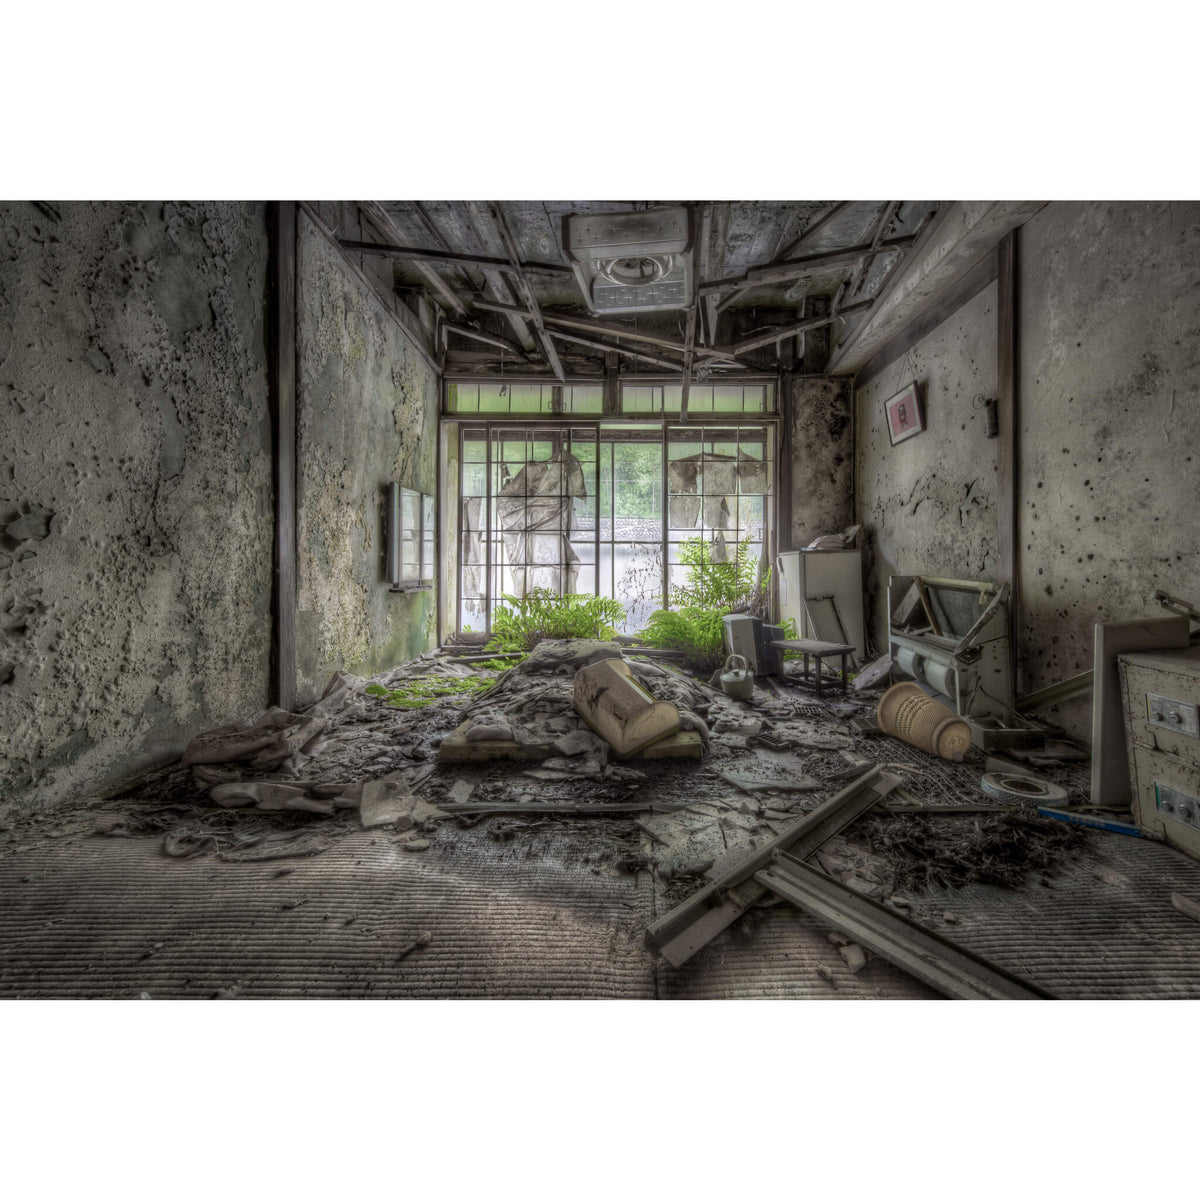 Entry Level Guest Room | Kinugawa Kan Fine Art Print - Lost Collective Shop